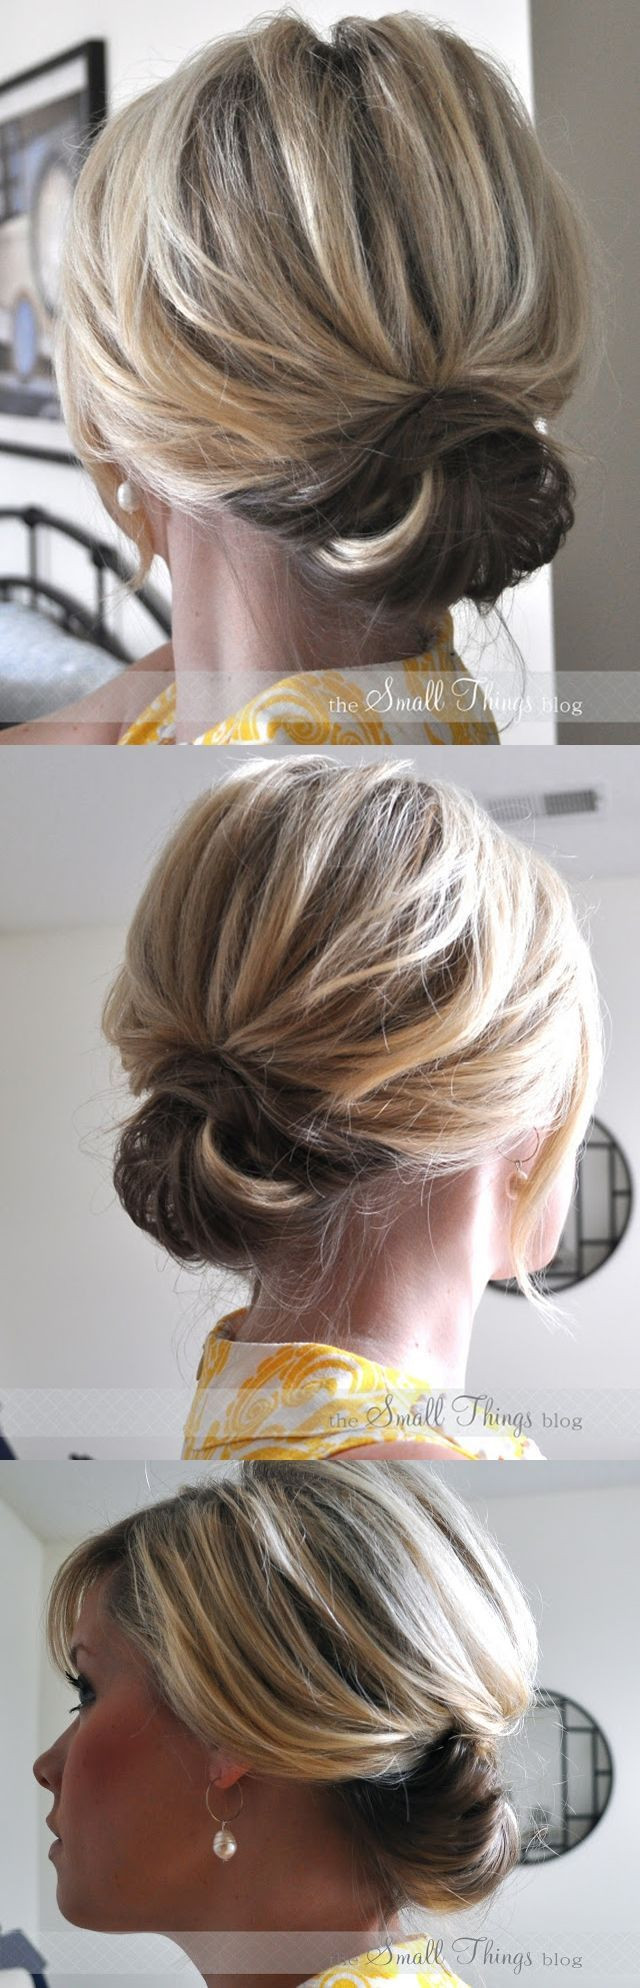 Wedding Hairstyles For Short Hair Step By Step
 The Chic Updo Looks For Short Hair